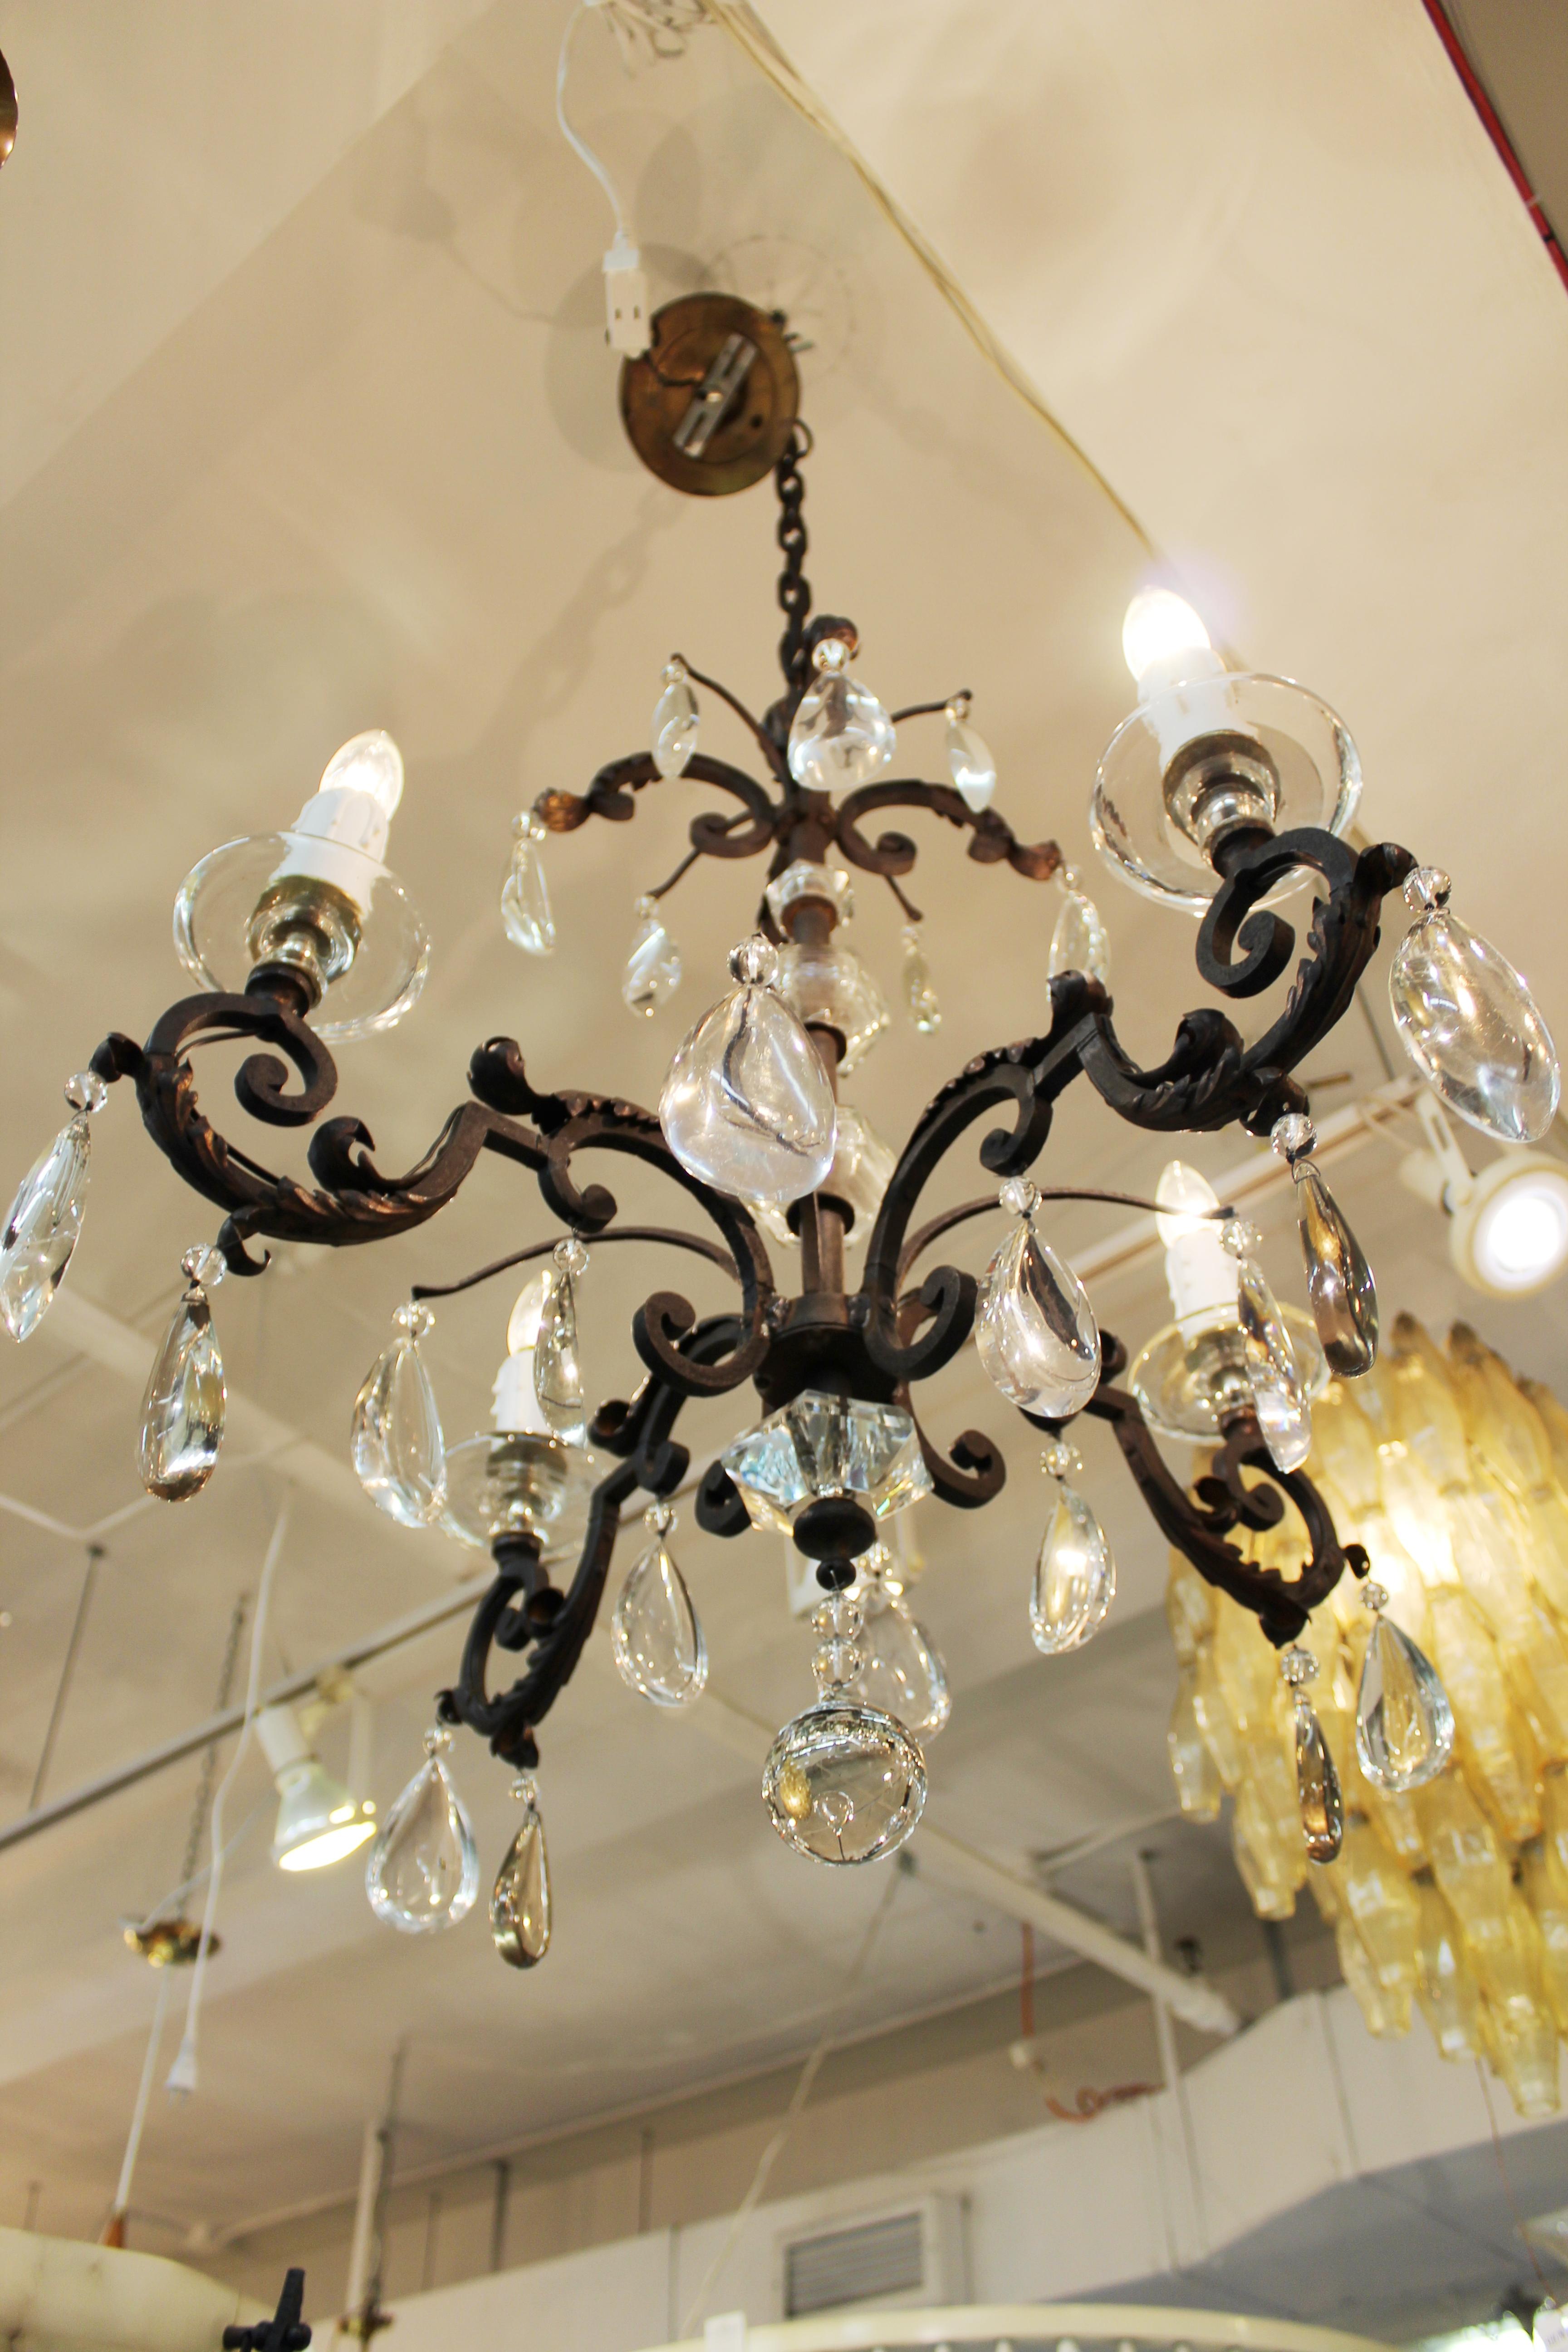 French chandelier dating from the 1940s in patinated metal. Features include four intricately scrolled arms with thick faux candle sockets atop cut crystal bobeches. Large crystal droplets dangle from each limb of the chandelier. Despite wear